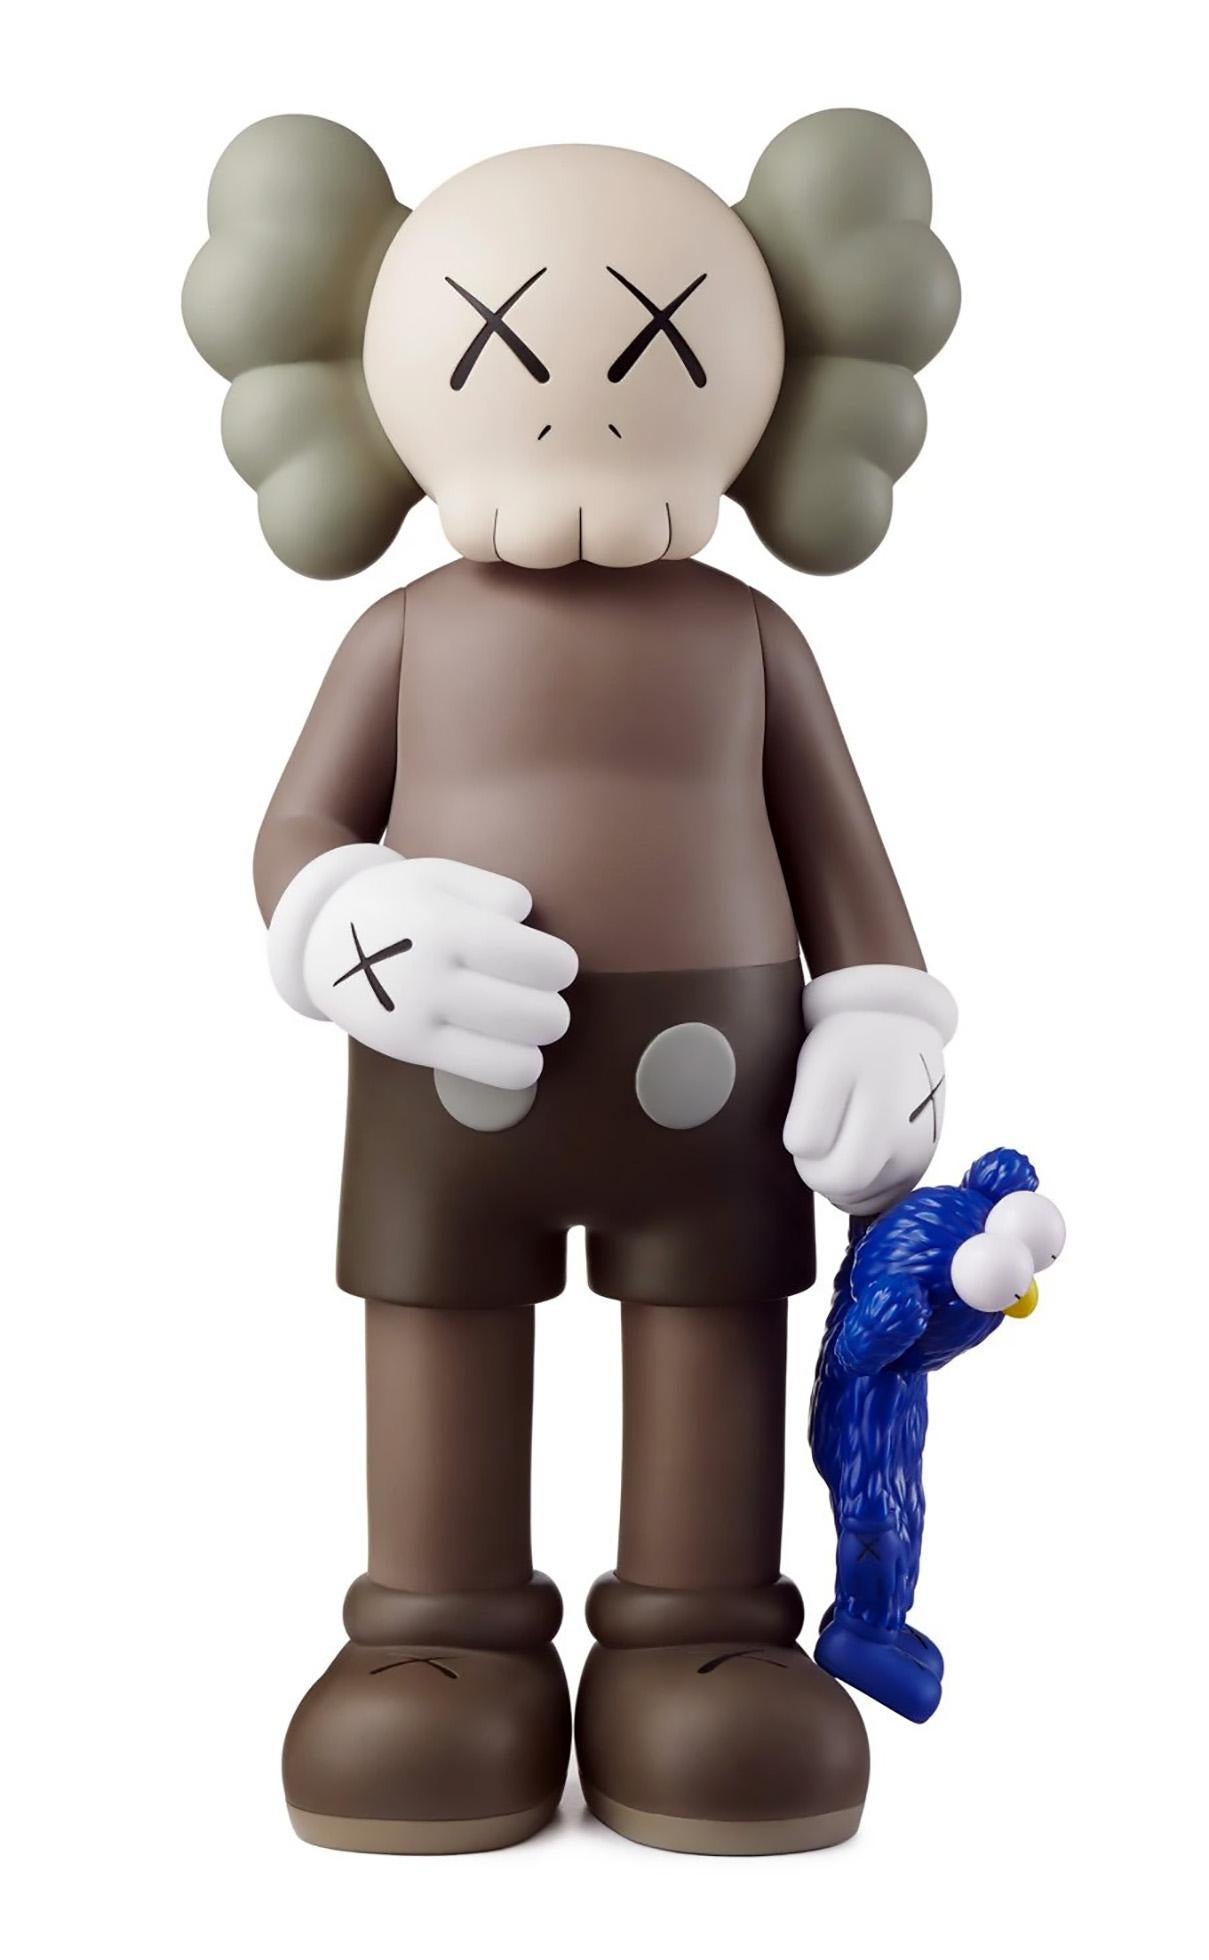 KAWS SHARE: Complete Set of 3, each new & unopened in its original packaging. 

Medium: Painted Vinyl Cast Resin. 
12.4 x 6.3 inches (applies to each individual).
New, unopened in its original box; excellent condition.  
From a sold out edition of